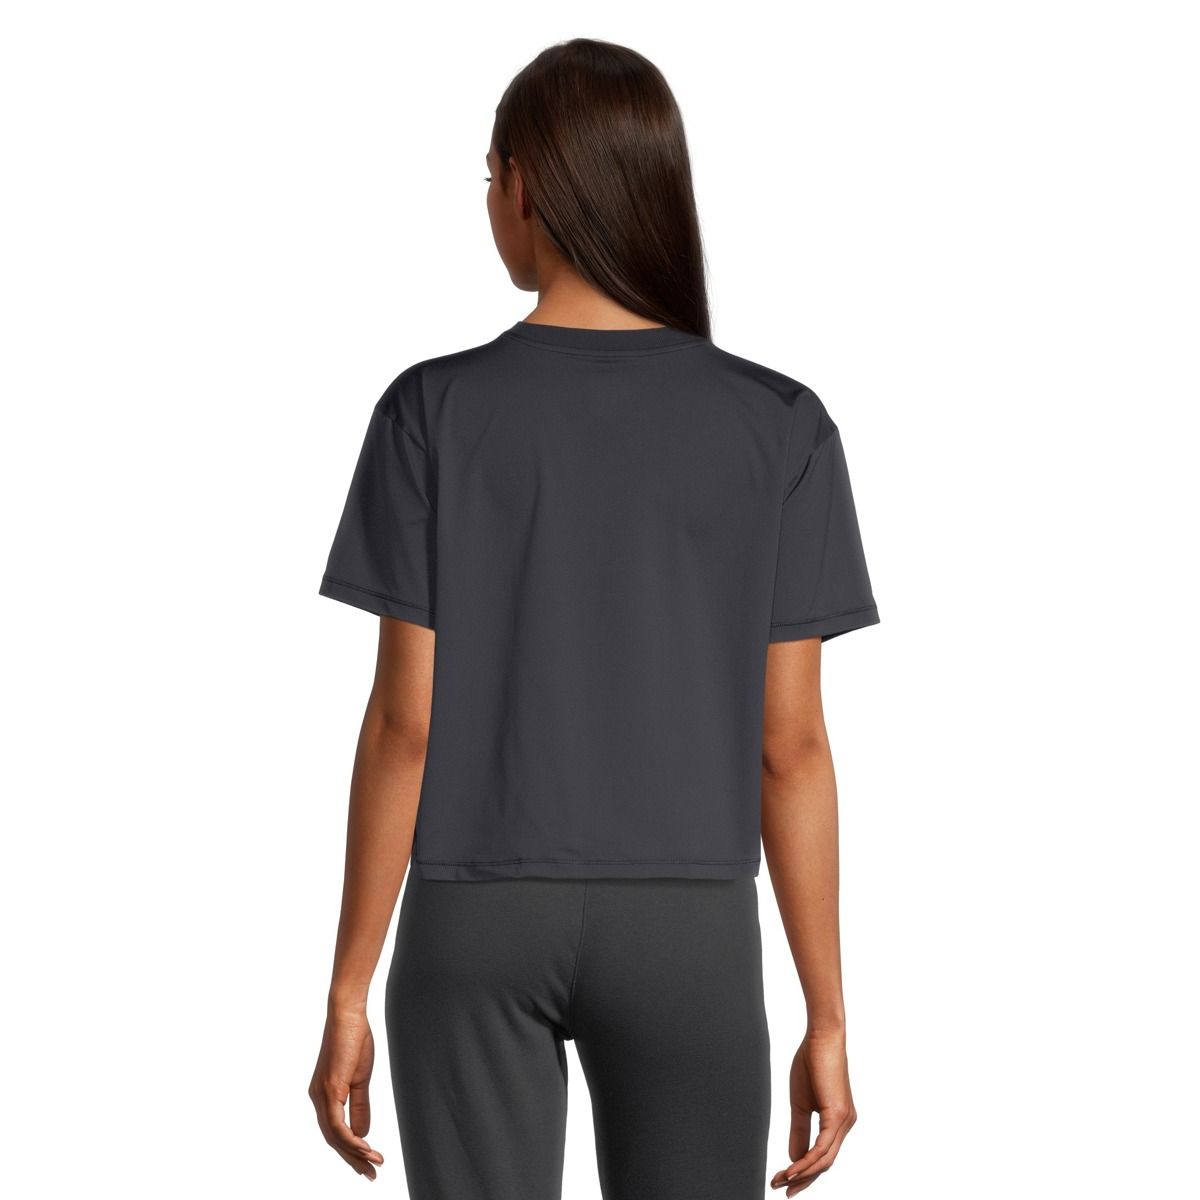 Under Armour Women's Meridian Cropped T Shirt